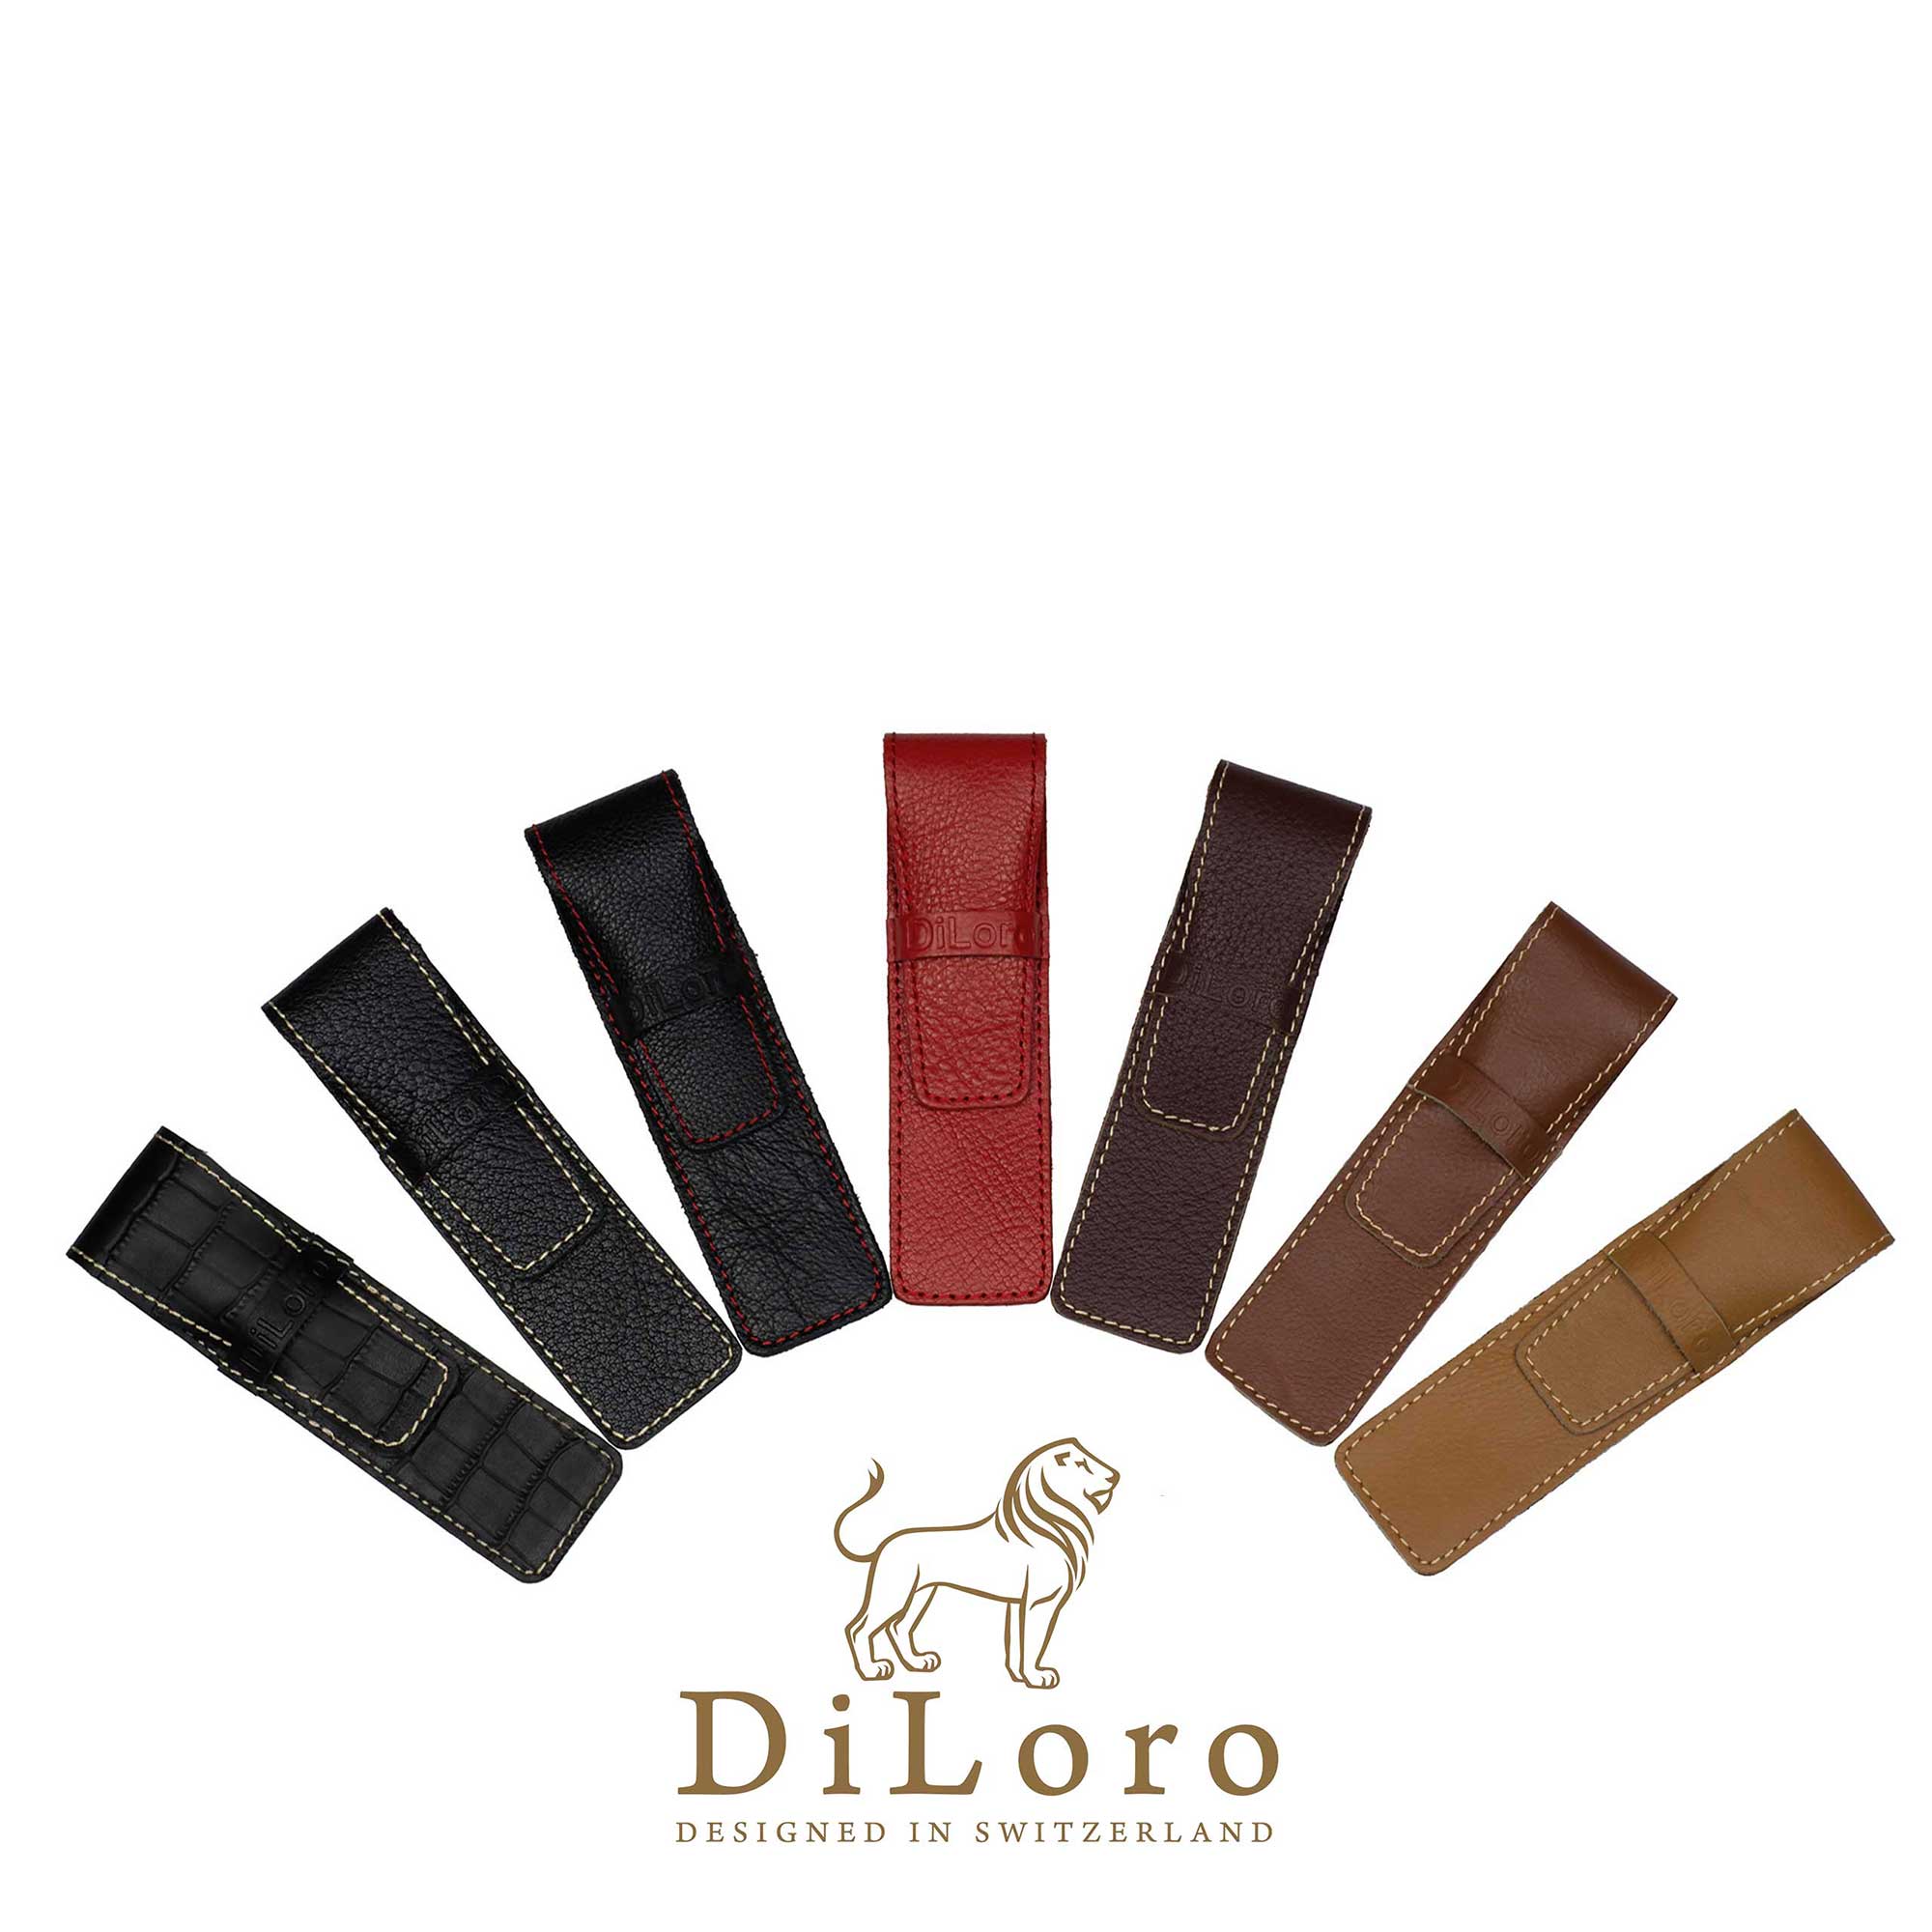 Shop for all DiLoro Leather Products